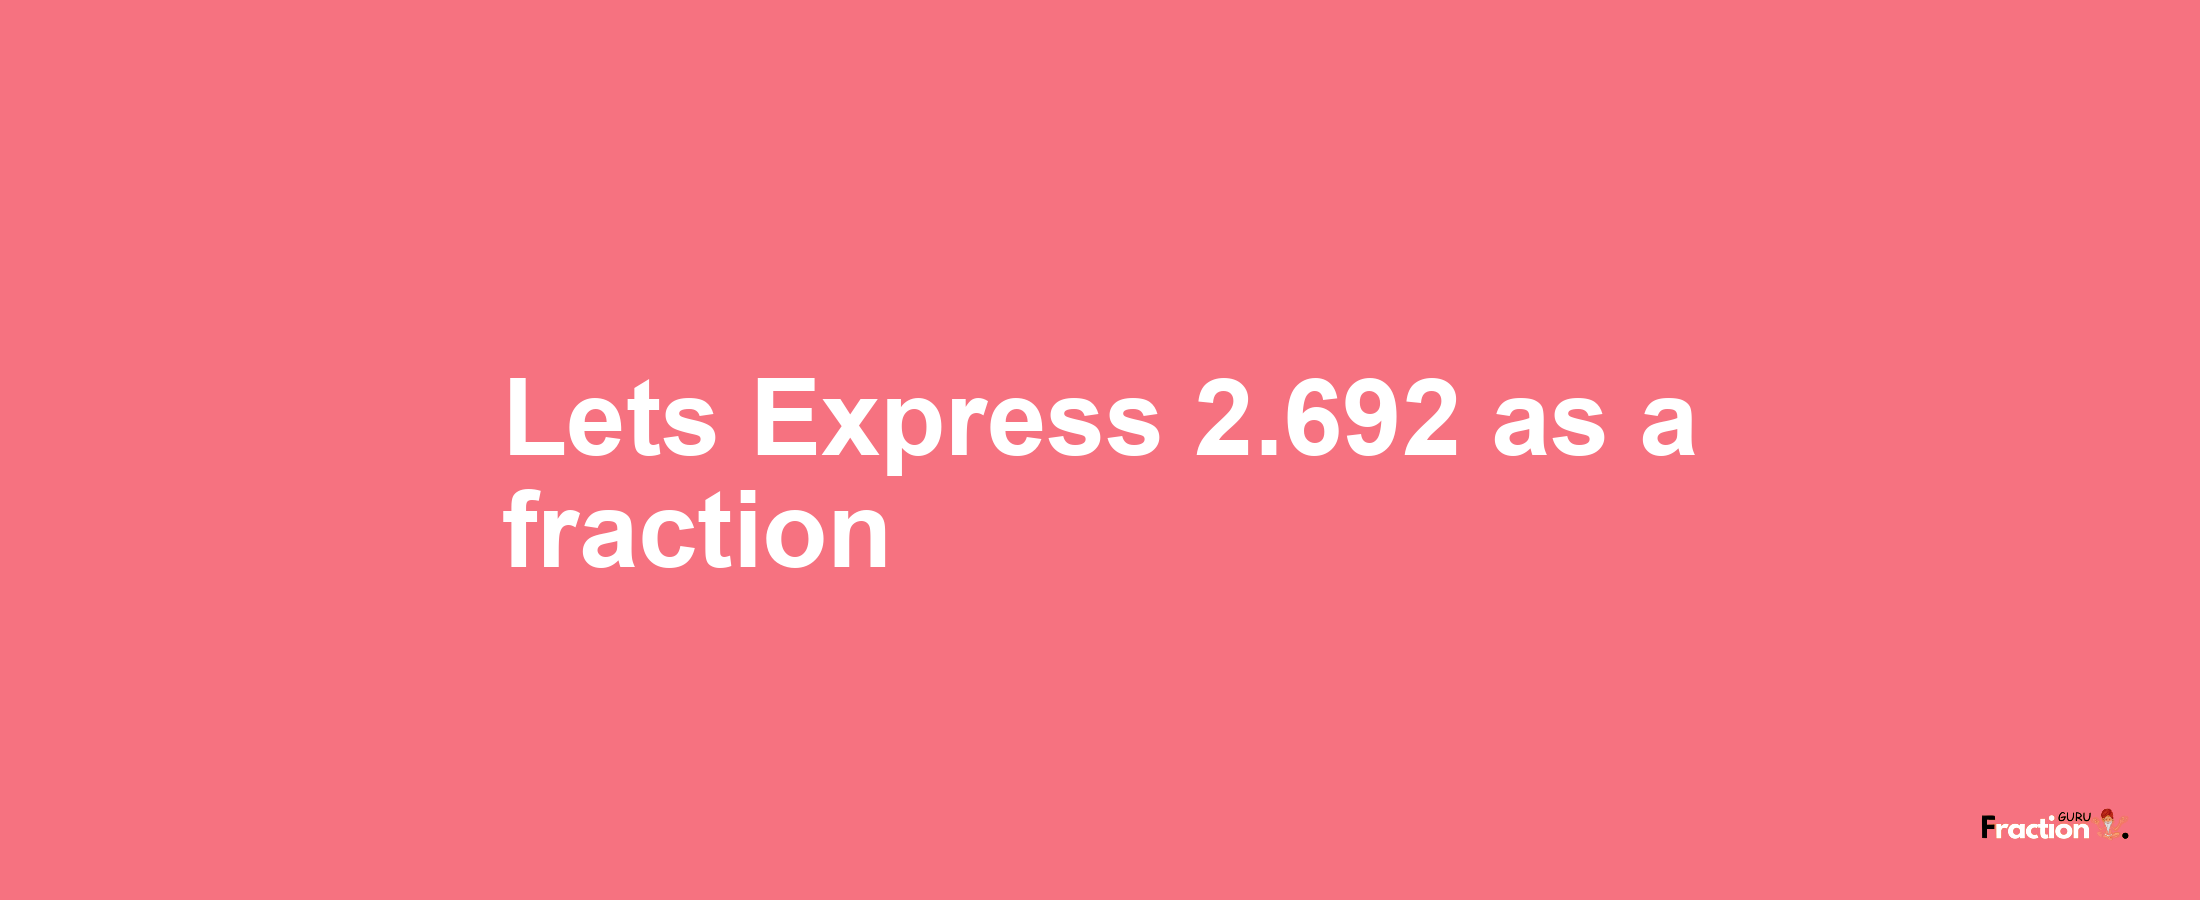 Lets Express 2.692 as afraction